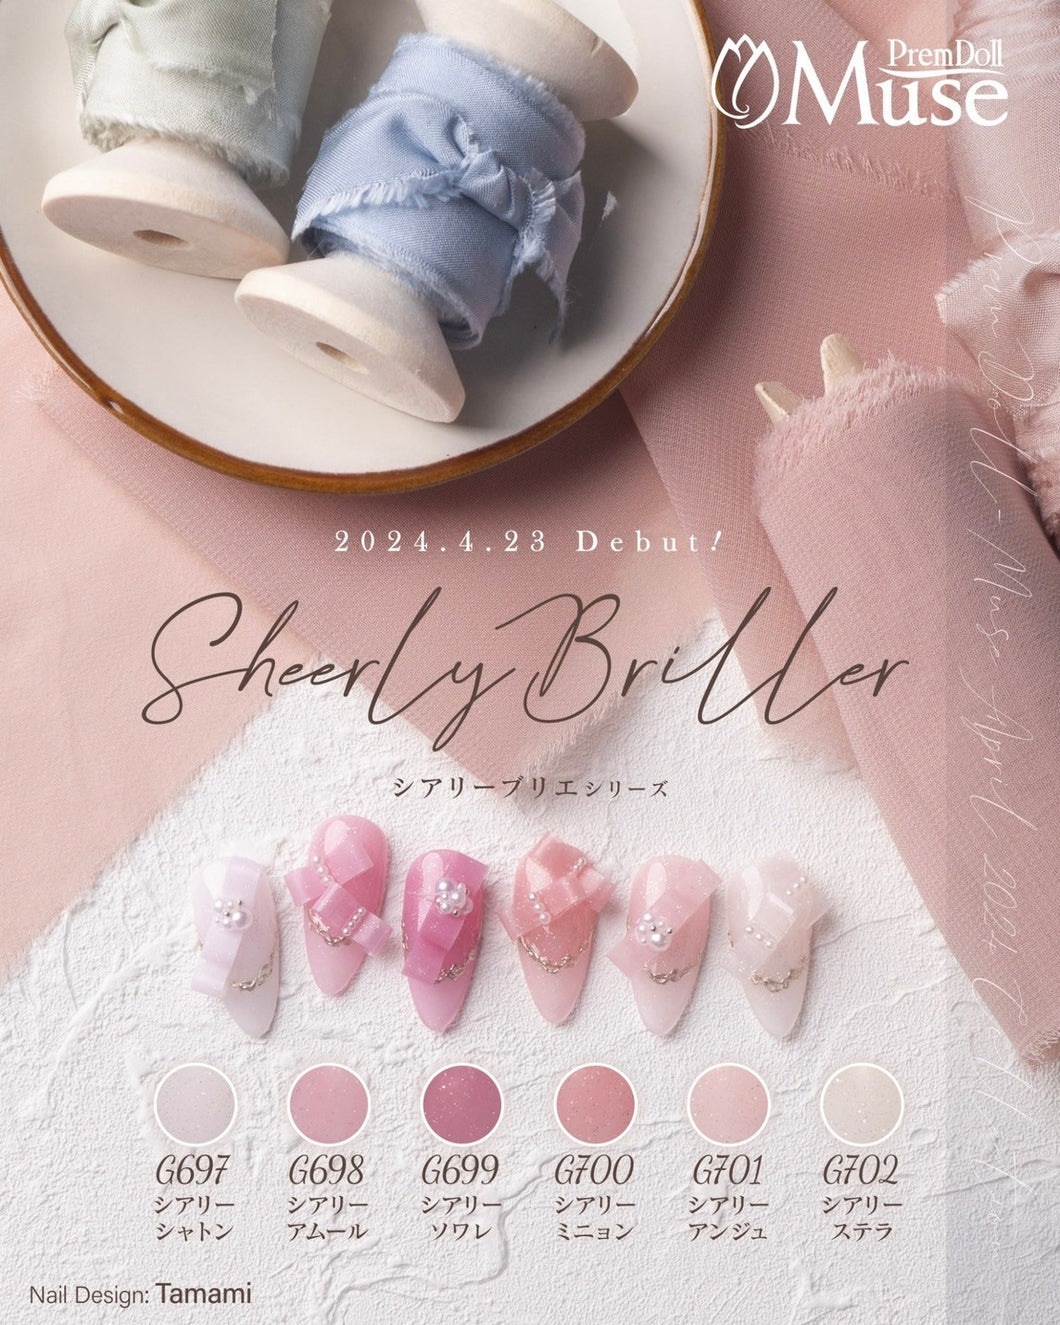 PREMDOLL MUSE SHEERLY BRILLER SERIES